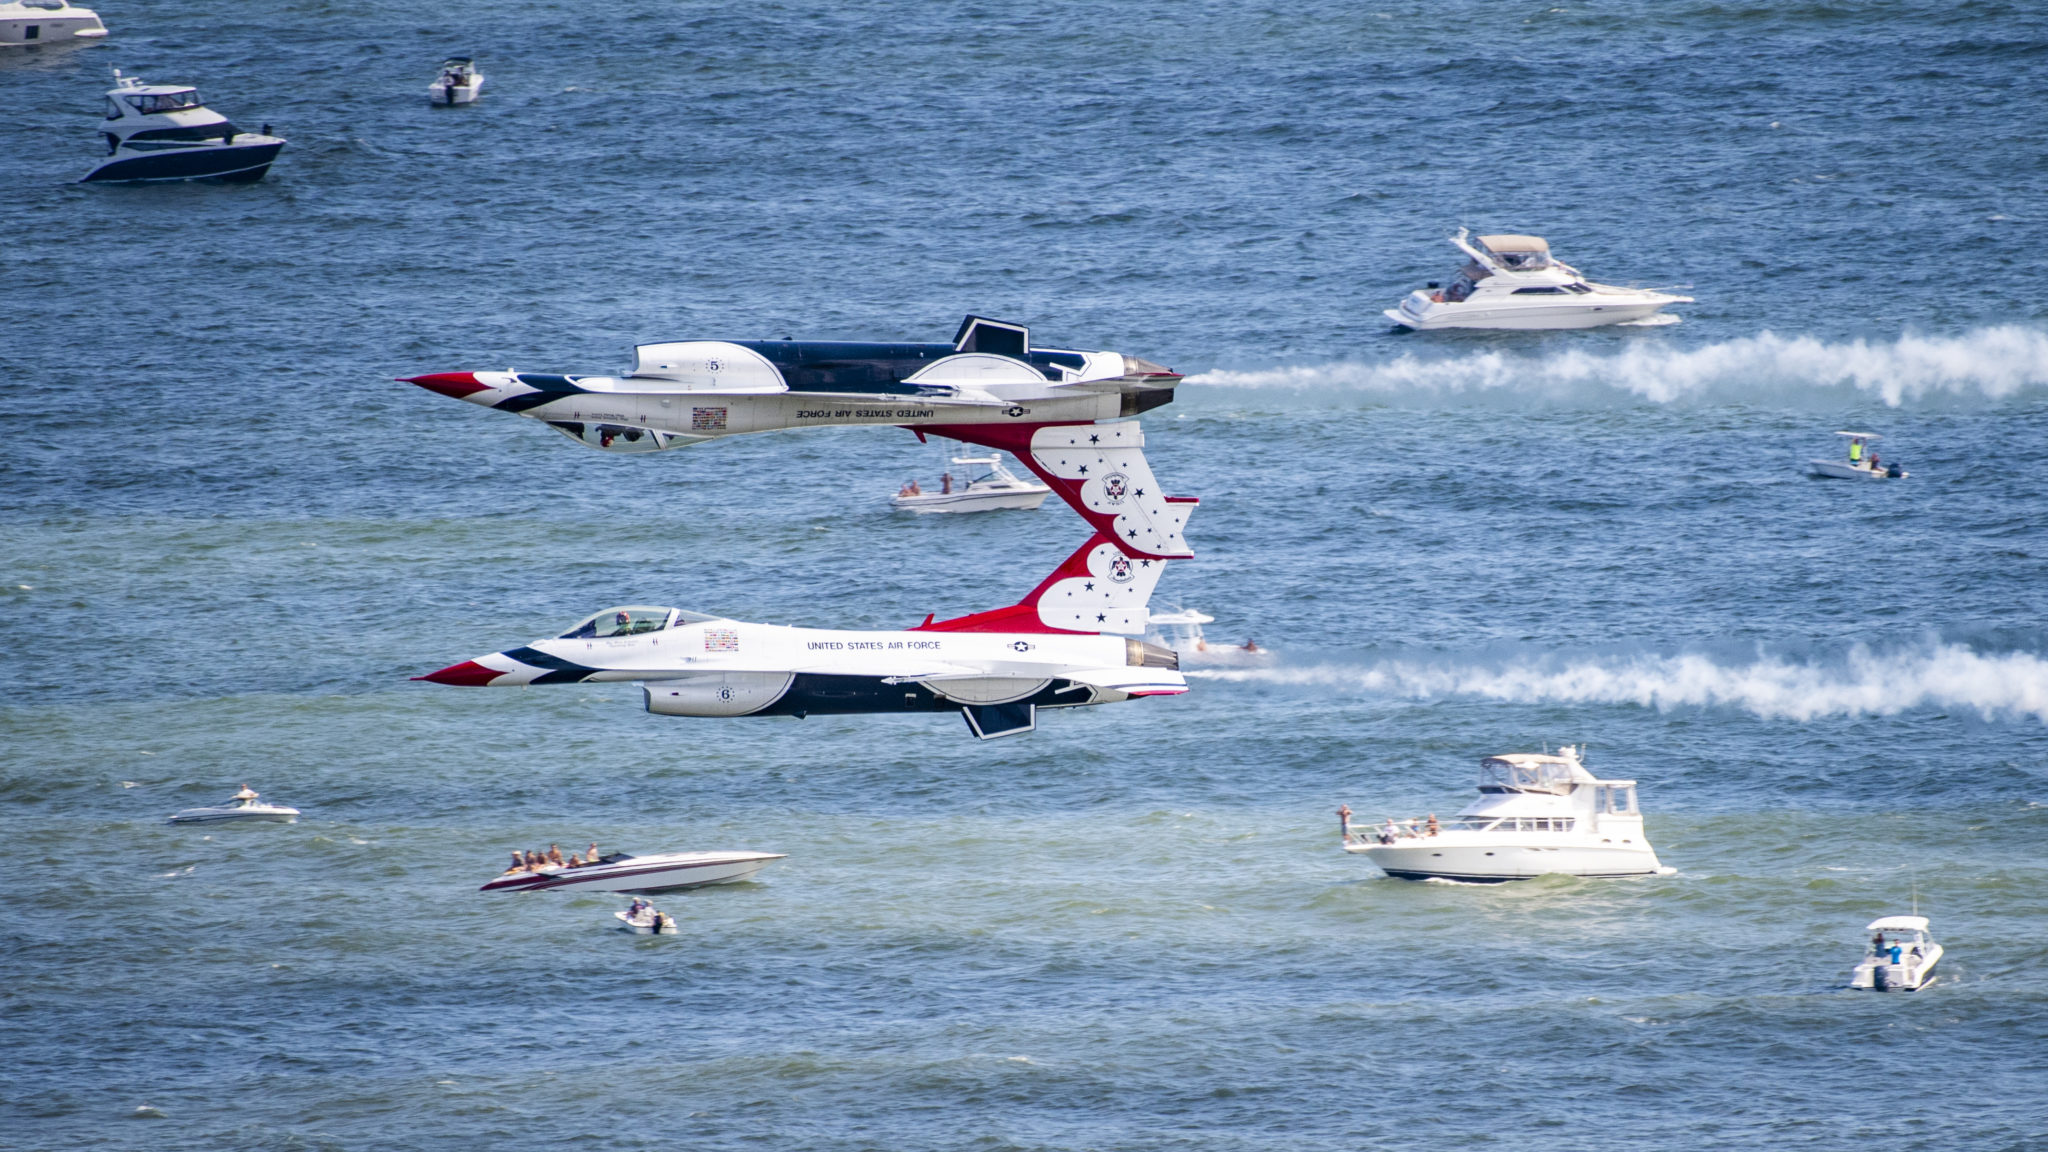 2022 Meet AC Atlantic City Airshow Announces Show Day Schedule Featuring FREE Spectacular Views of the Show from Atlantic City Beaches and Boardwalks, Along with  the Return of the Veterans Resource Row!